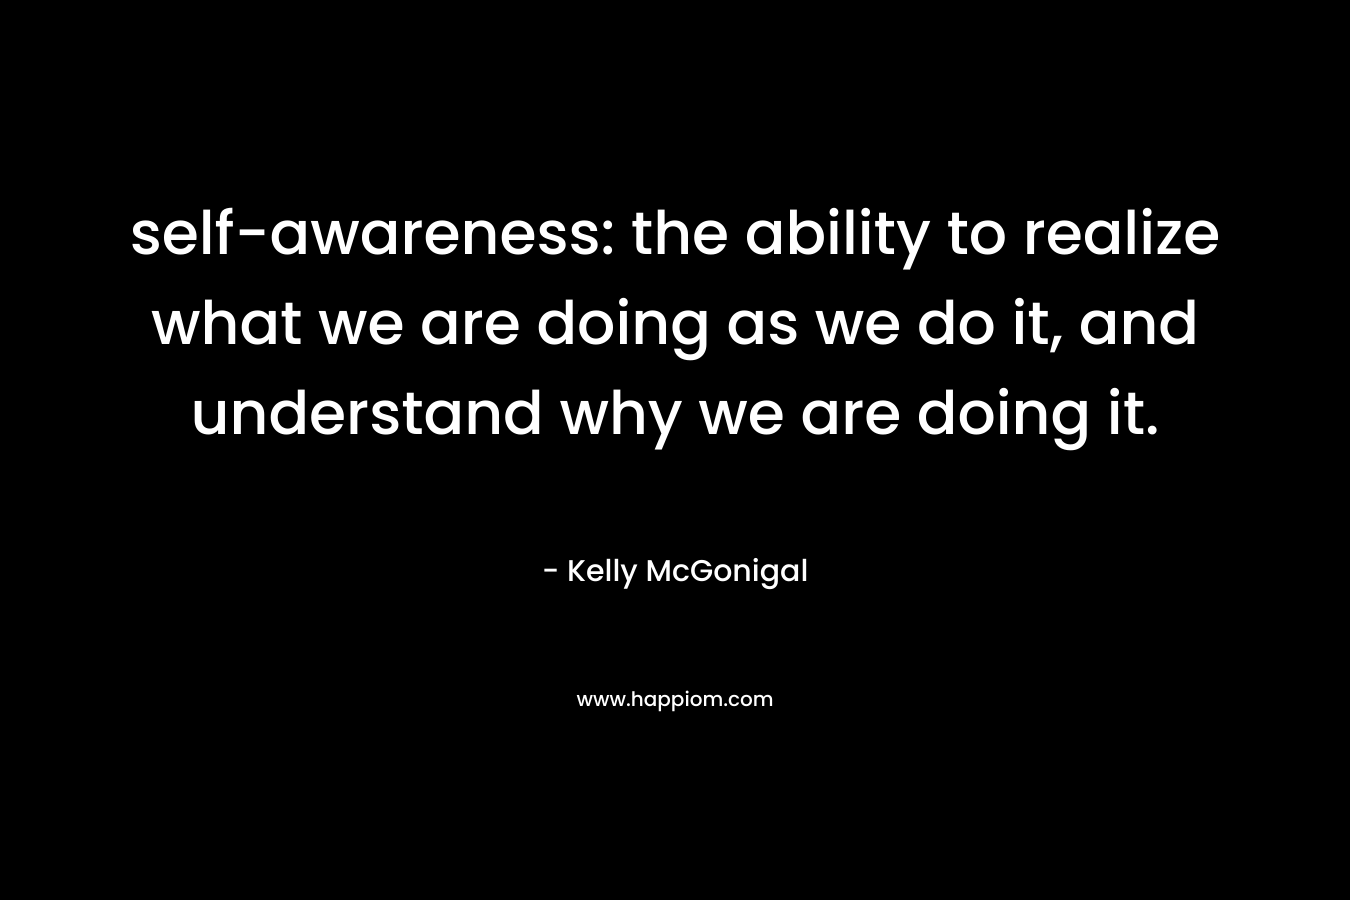 self-awareness: the ability to realize what we are doing as we do it, and understand why we are doing it.